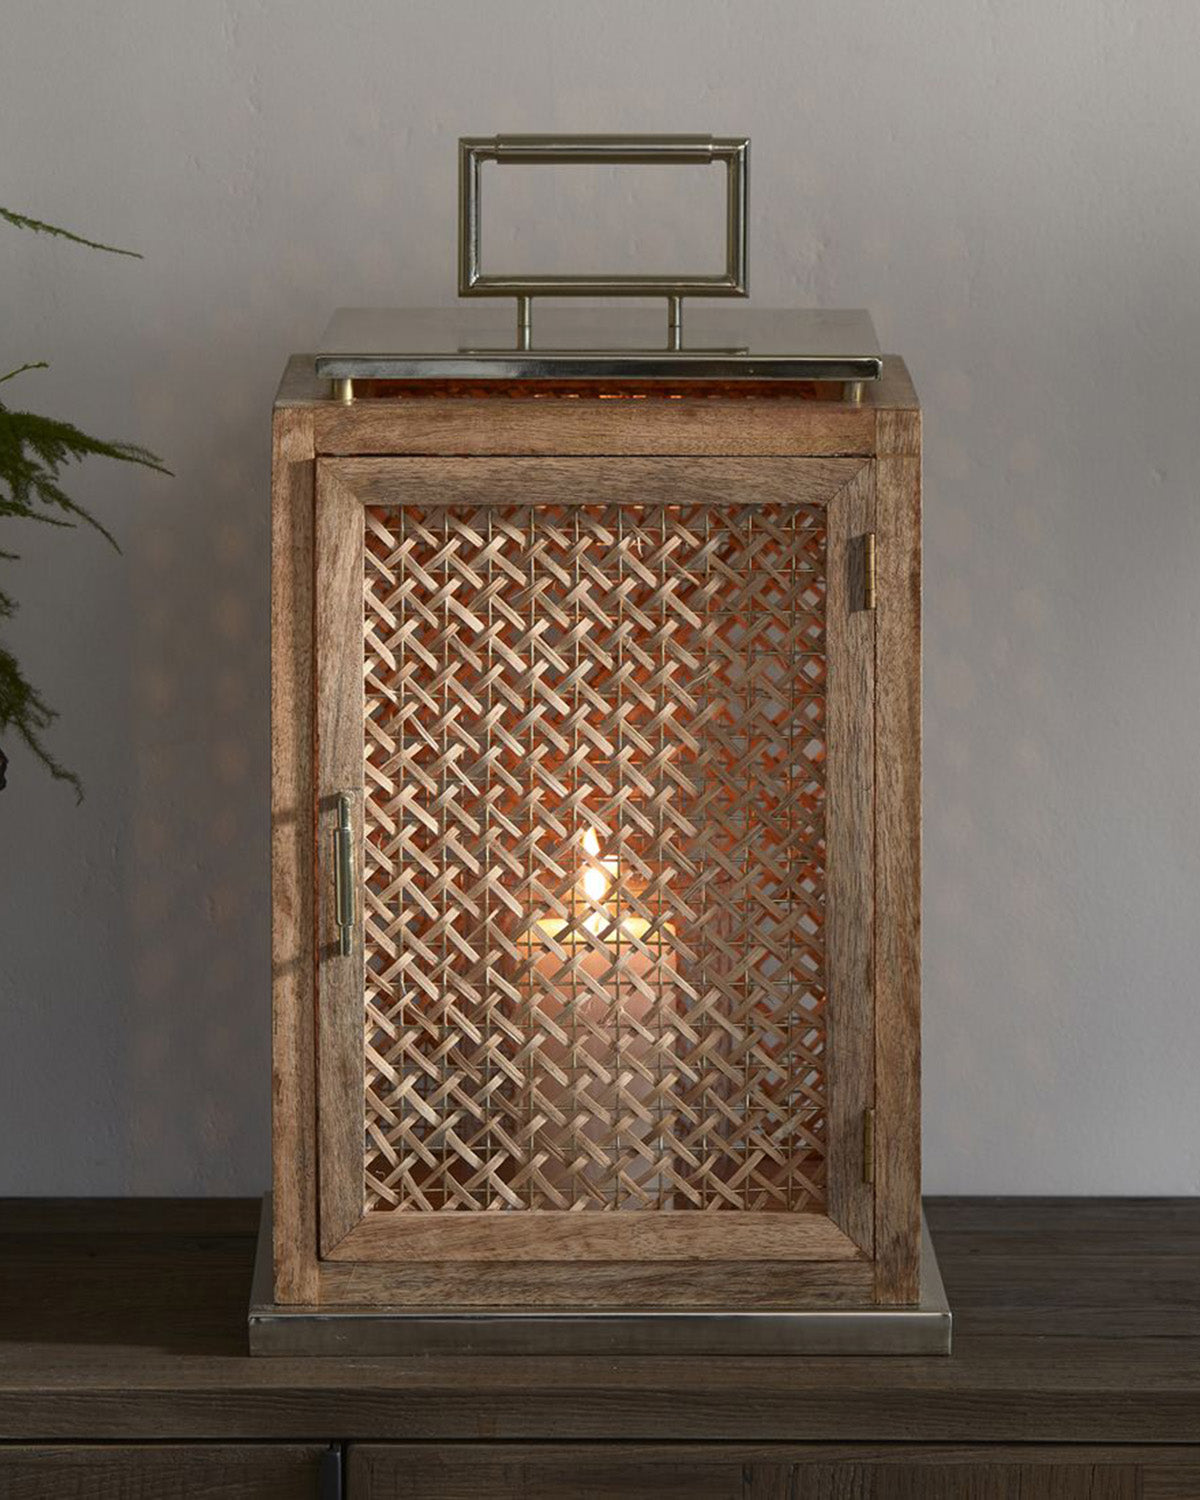 LANTERN made of Rattan and wood, bottom edges are made of soft gold aluminum  by Riviera Maison